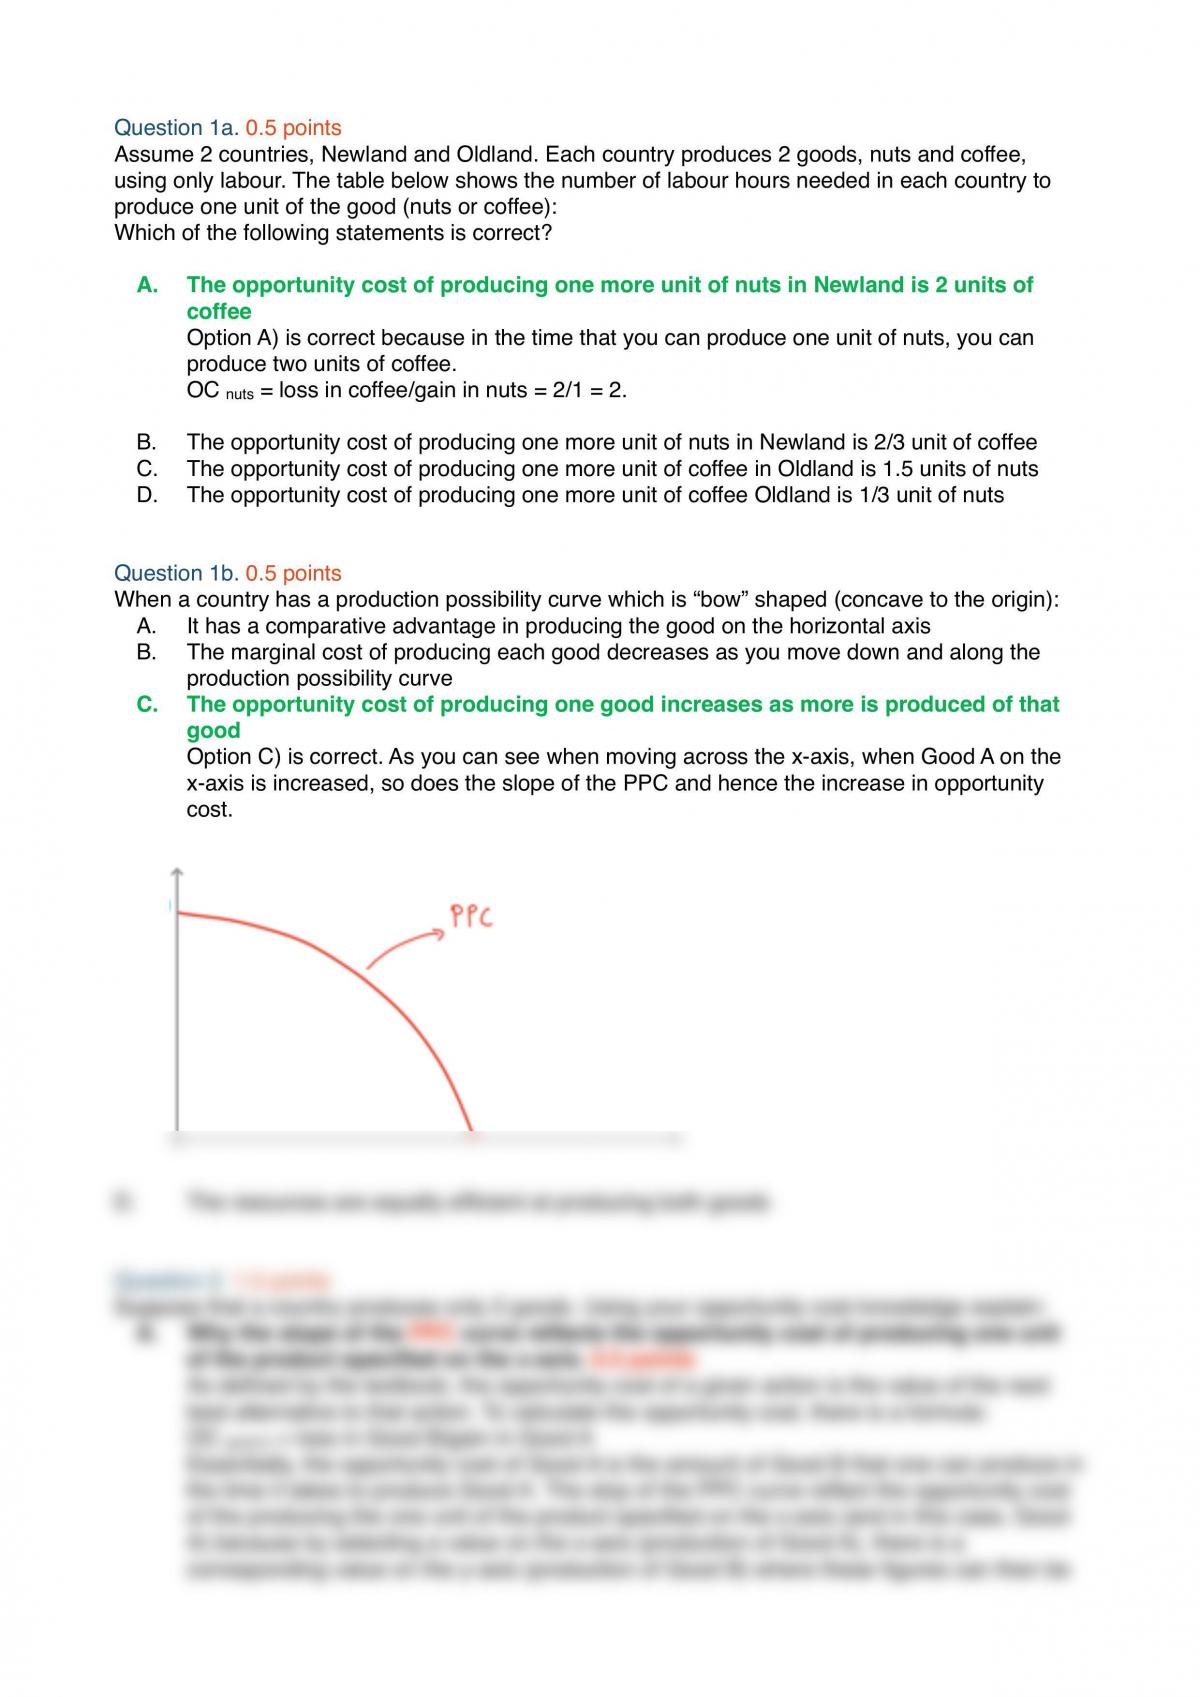 Week_3_Hand-in_Assignment_ ECON1101 - Page 1